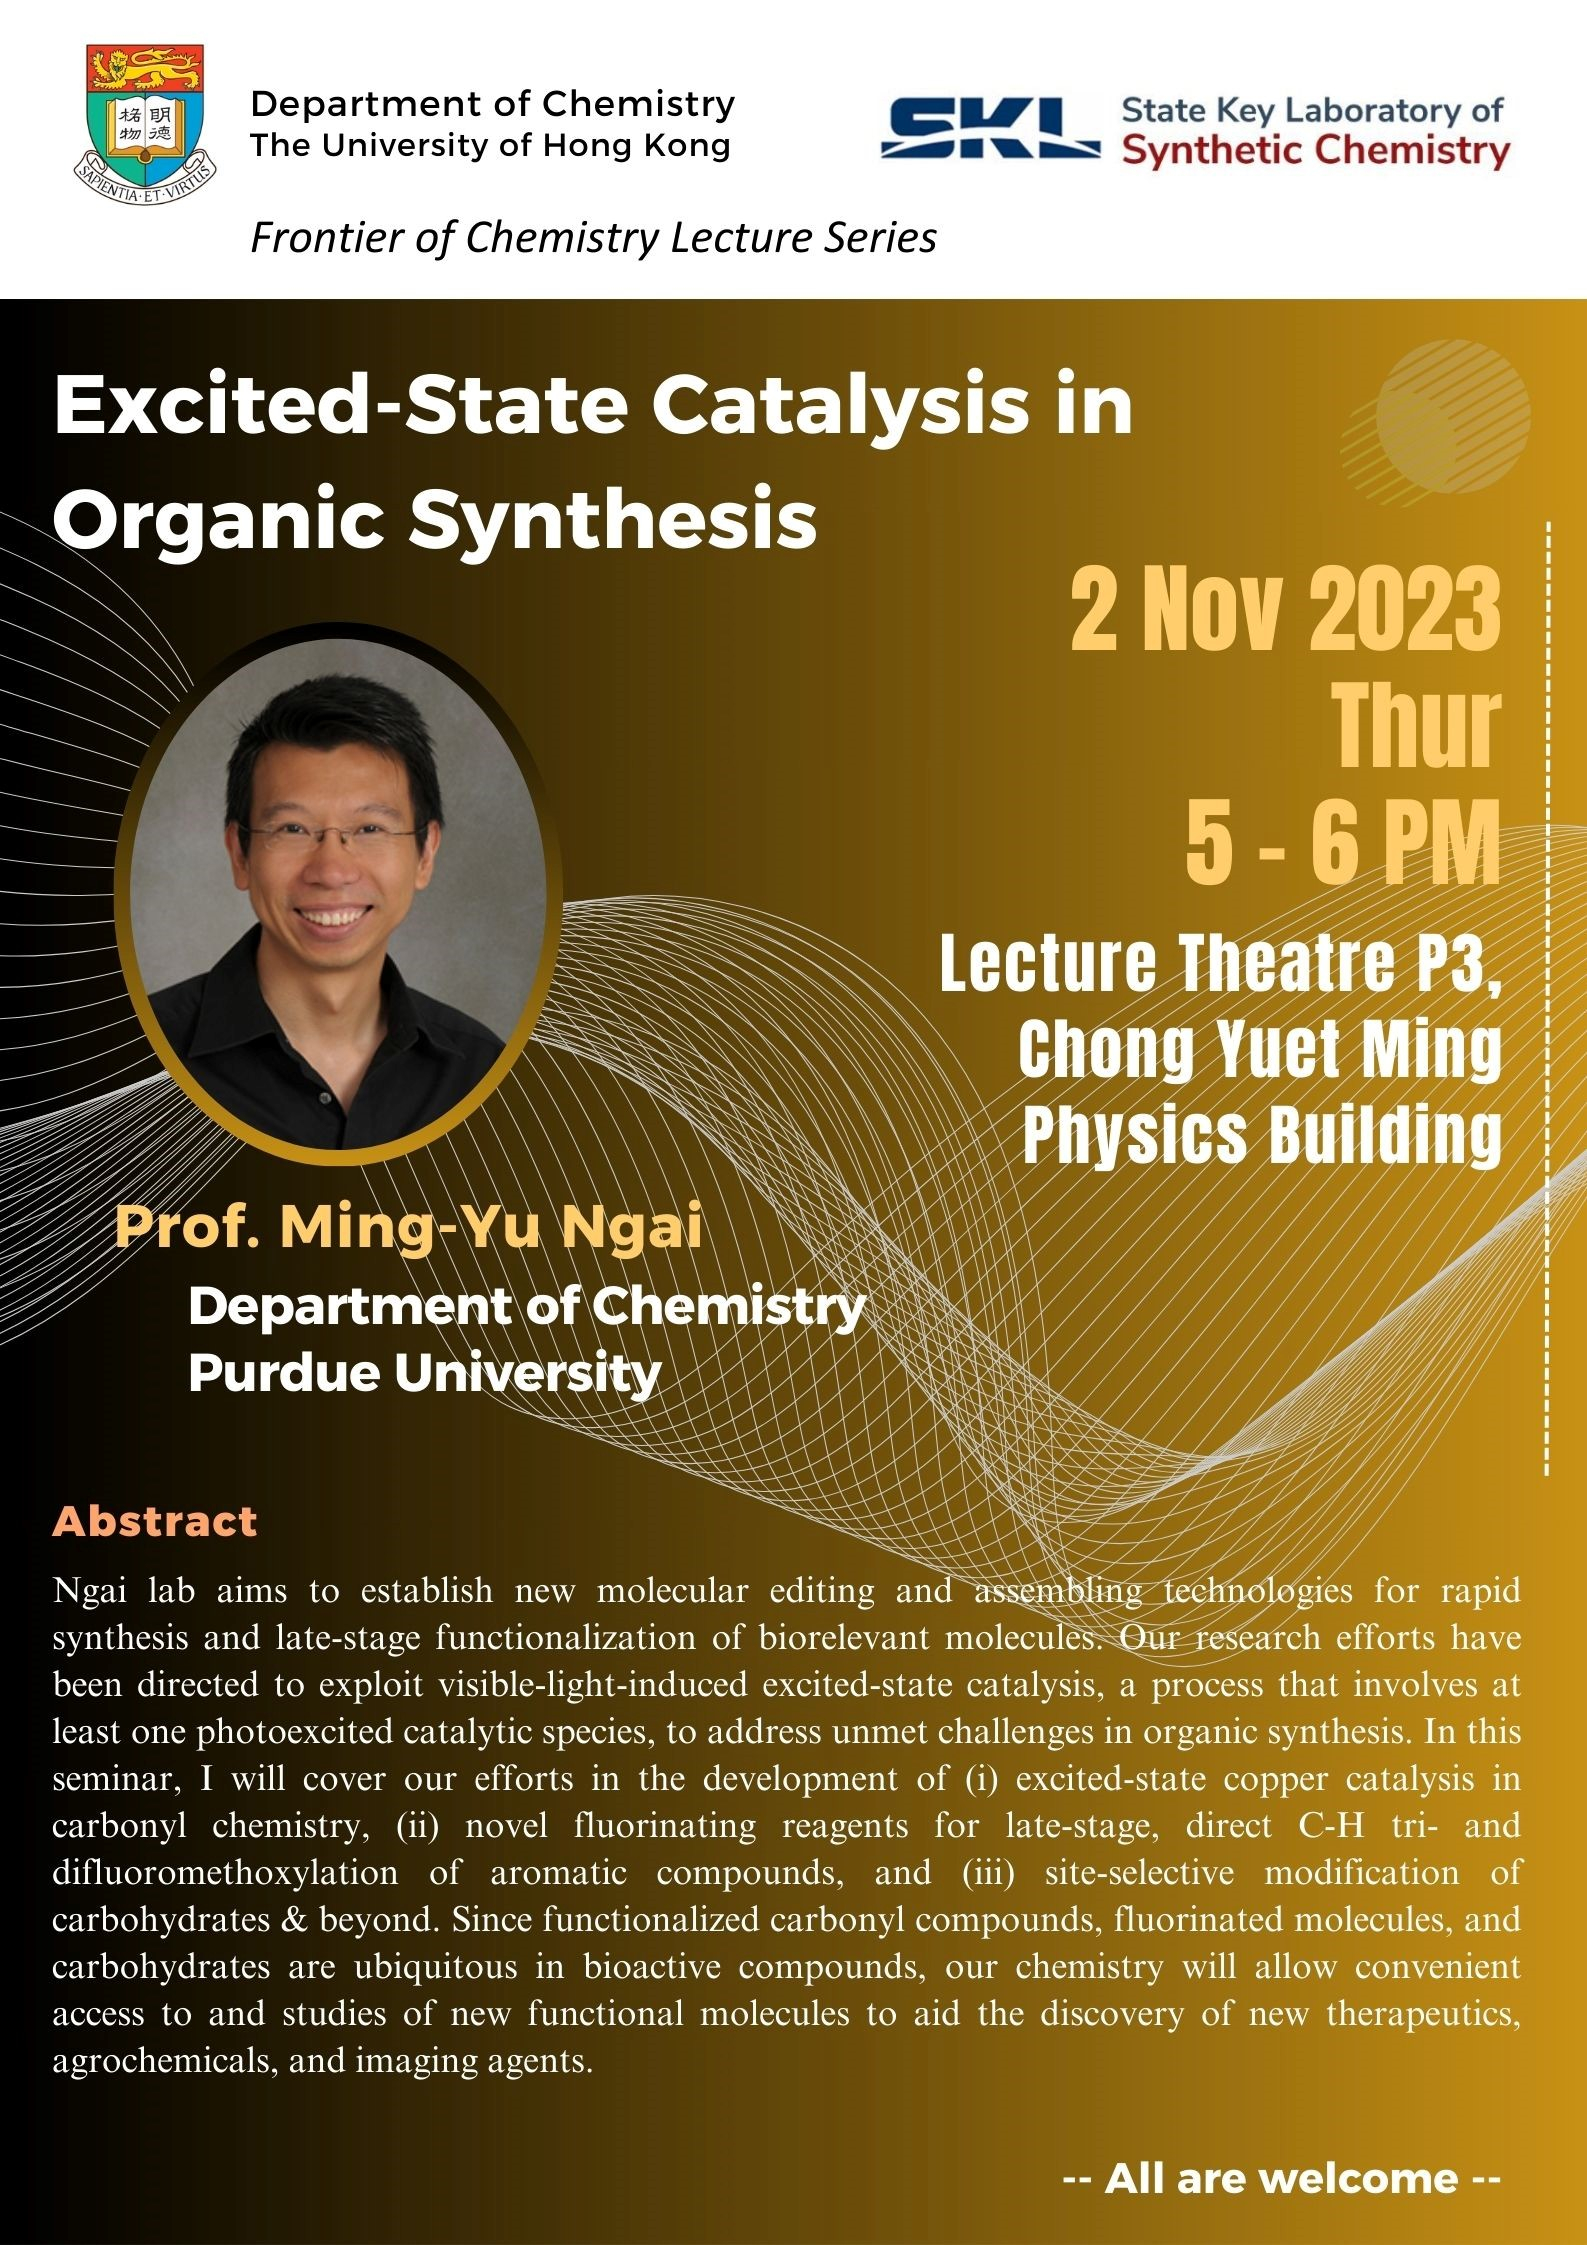 Self Photos / Files - 20231102_Excited-State Catalysis in Organic Synthesis